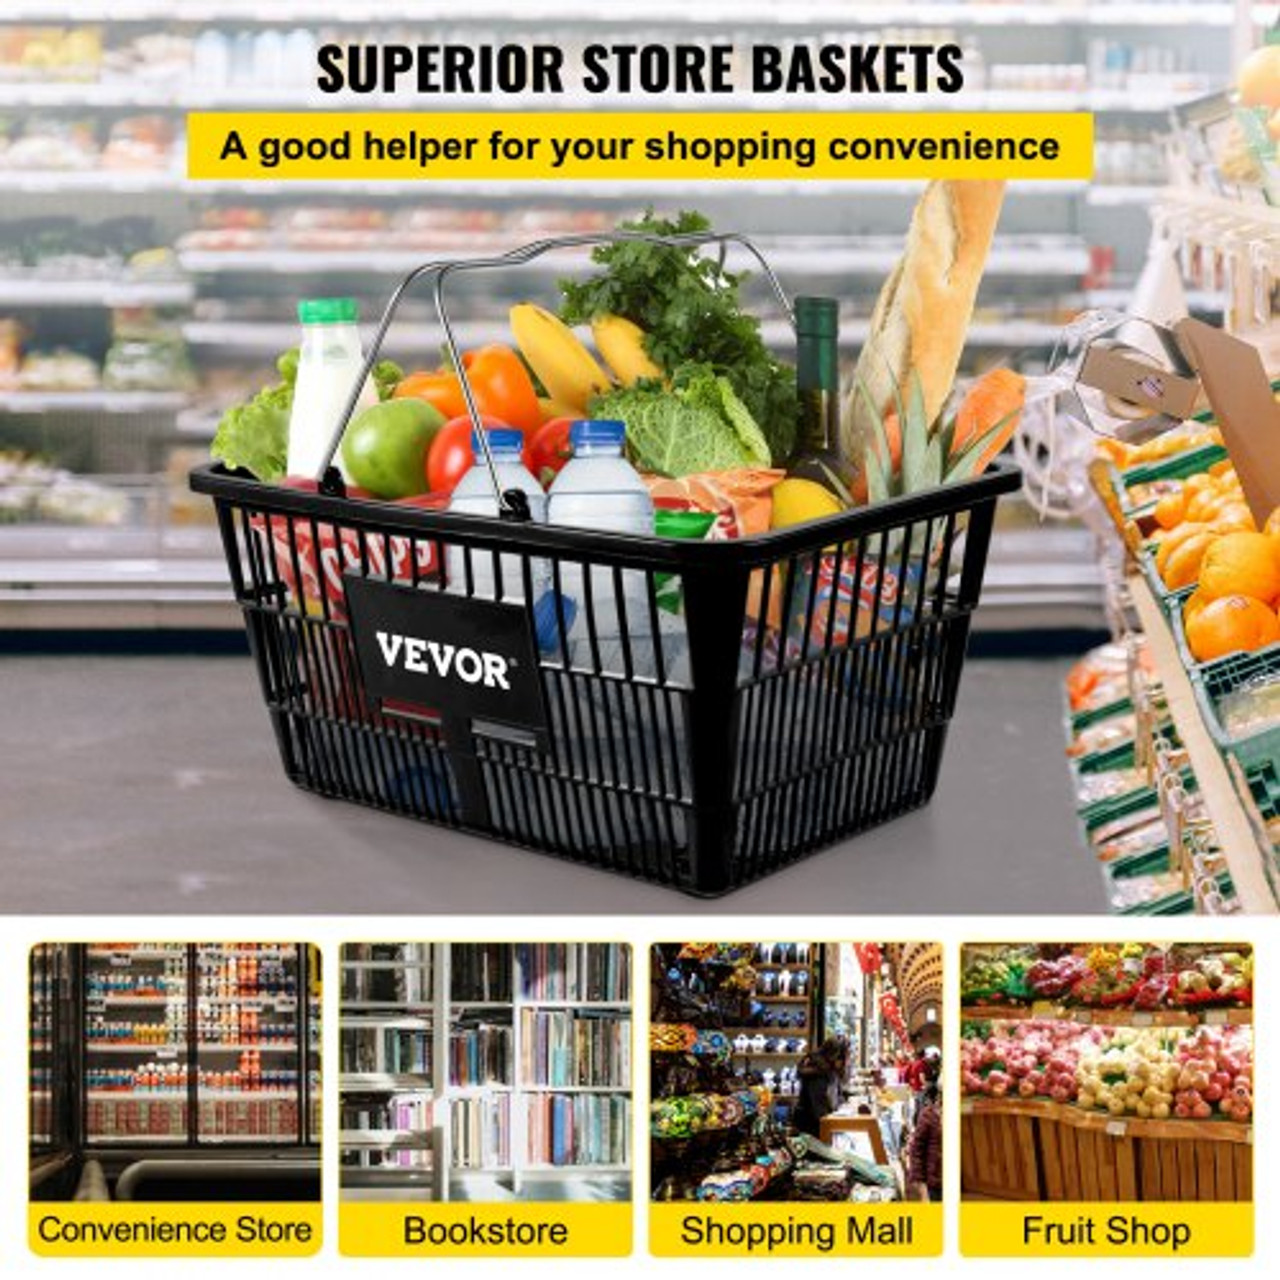 Shopping Basket, Set of 12 Black, Durable PE Material with Handle and Stand, Basket Dimension 16.9"L x 11.8"W x 8.07"H and Used for Supermarket, Retail, Grocery- Holds 21 L of Merchandise